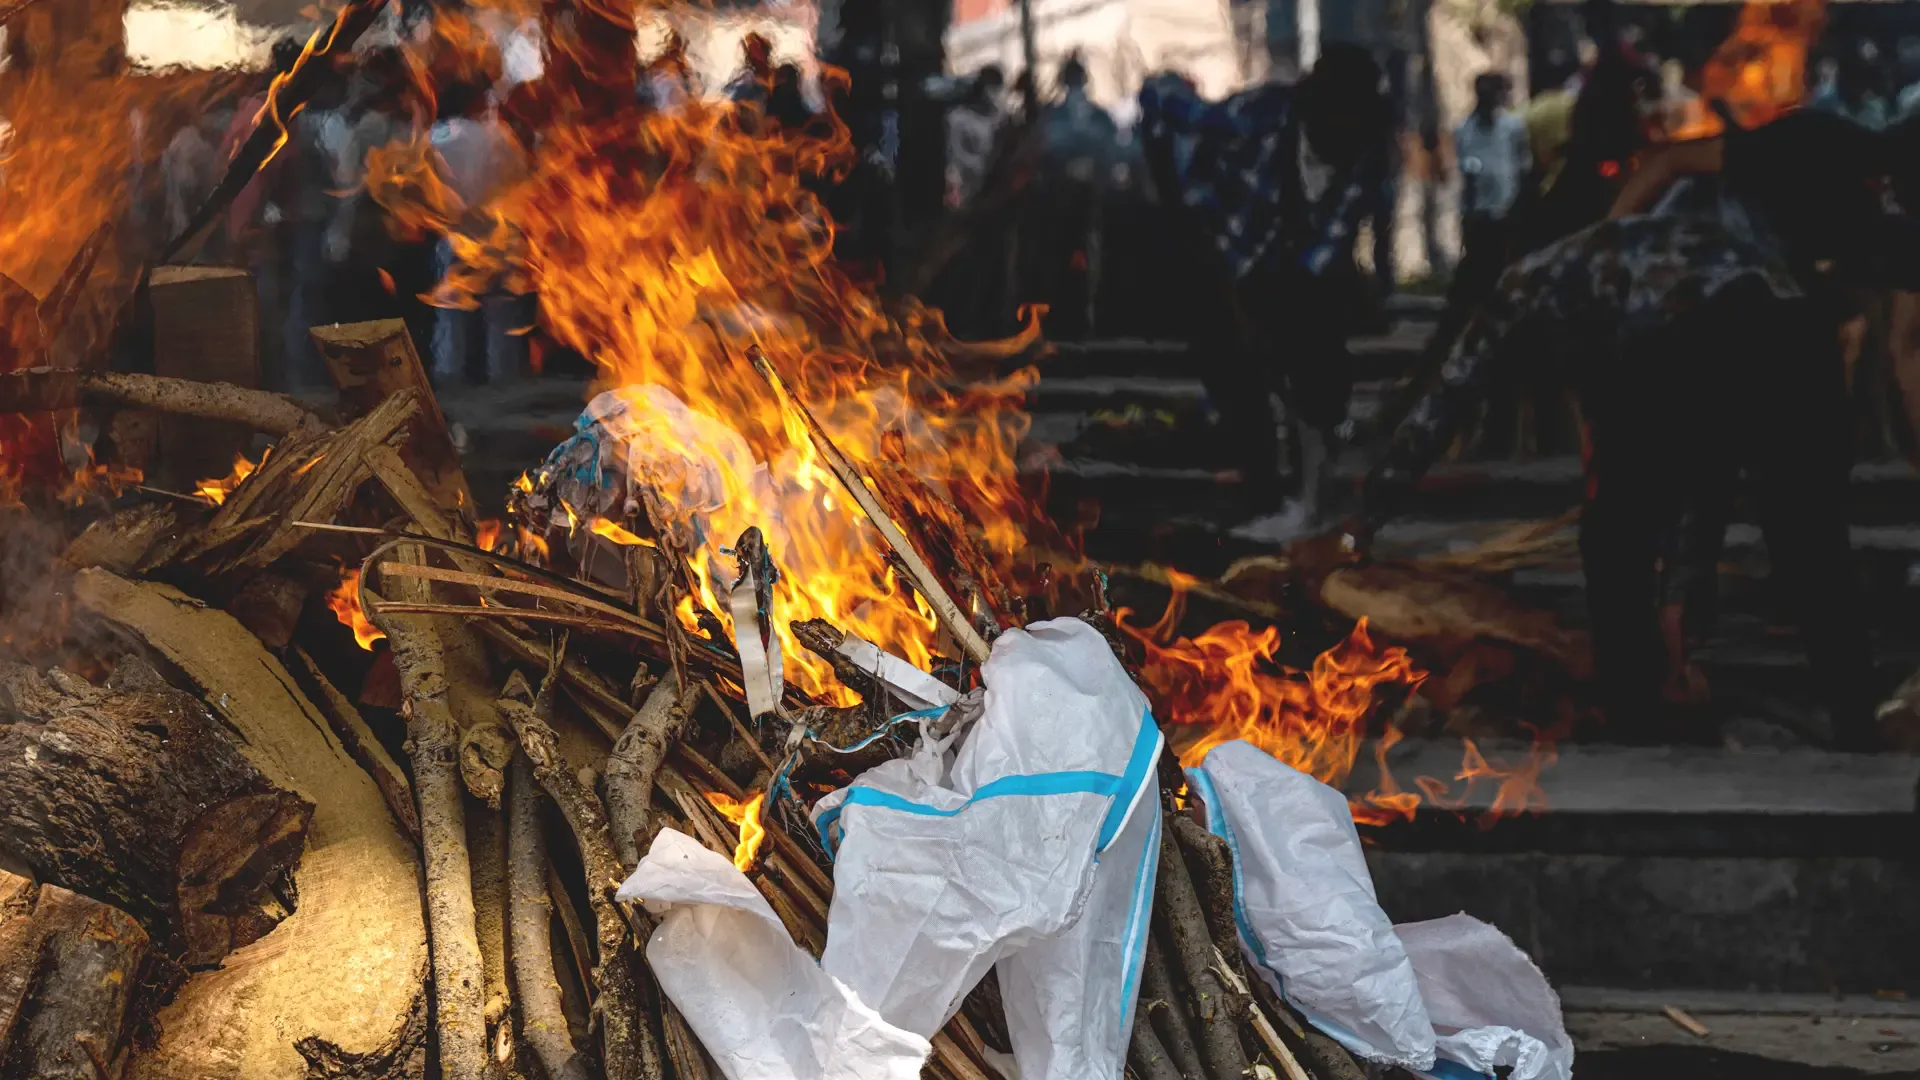 /A funeral pyre is burned with relatives' personal protective equipment at a cremation ground in New Delhi